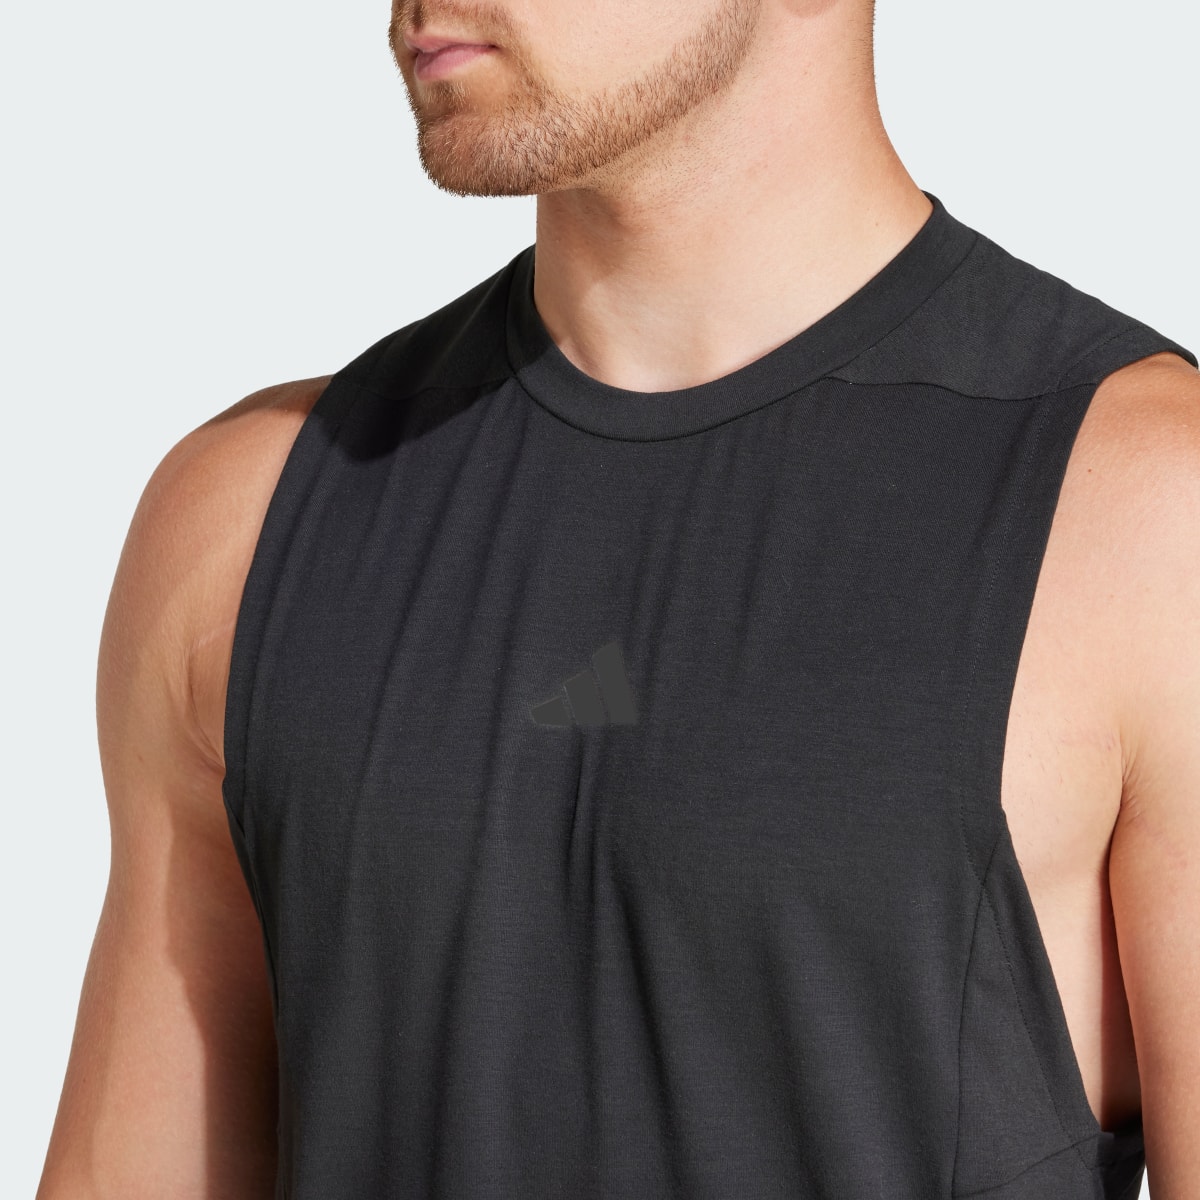 Adidas Designed for Training Workout Tanktop. 6